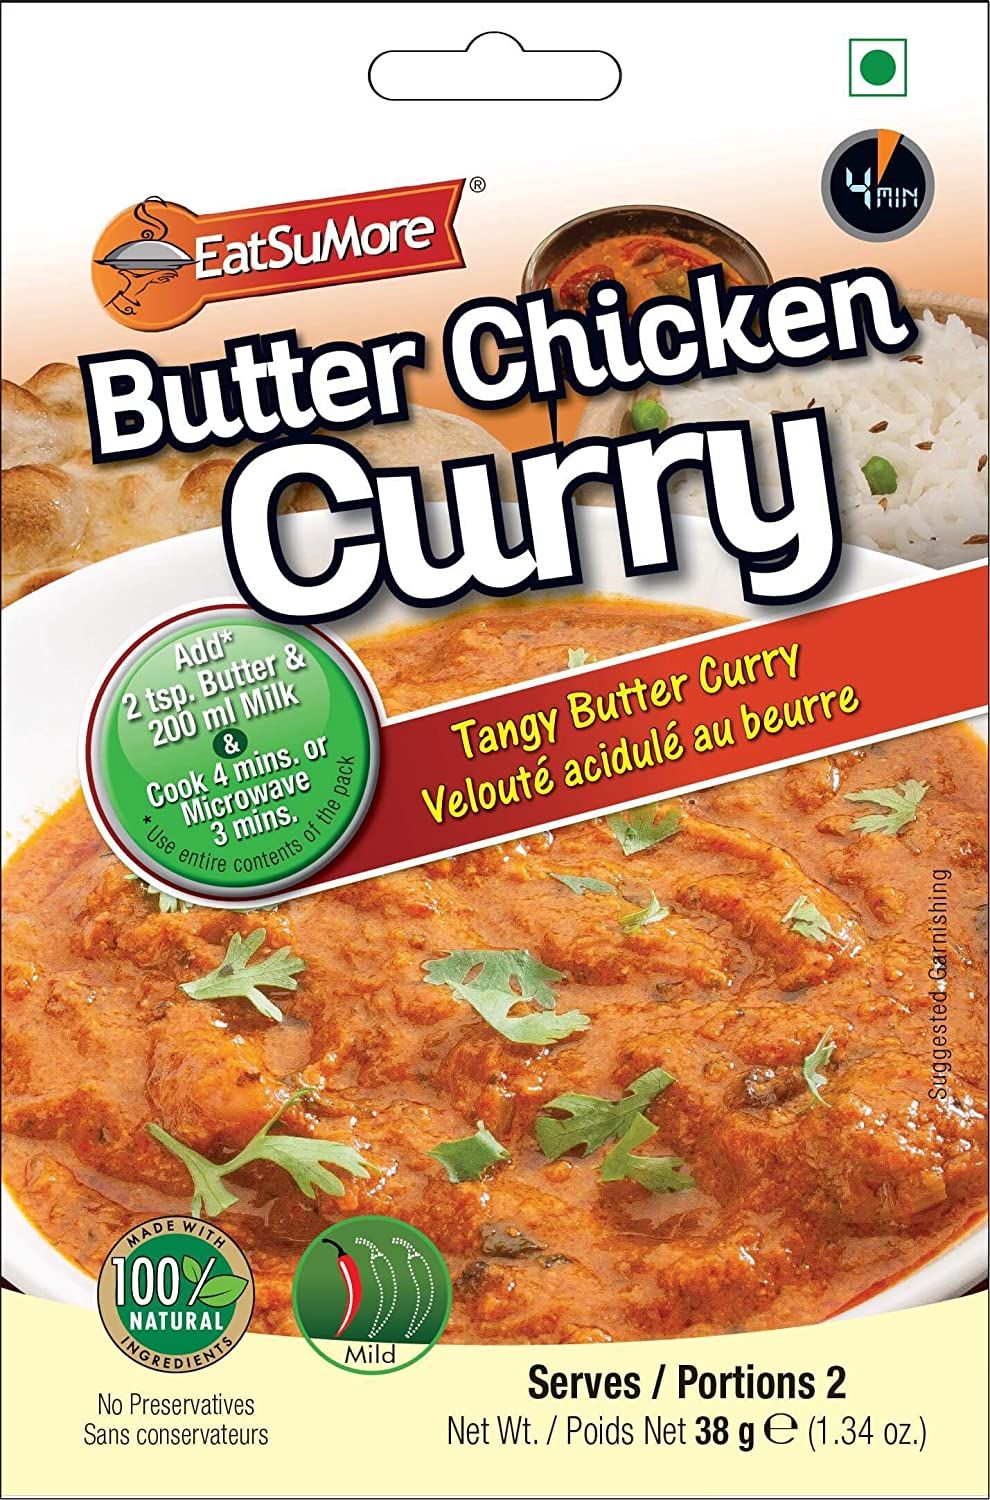 Eatsu More Butter Chicken Curry Image